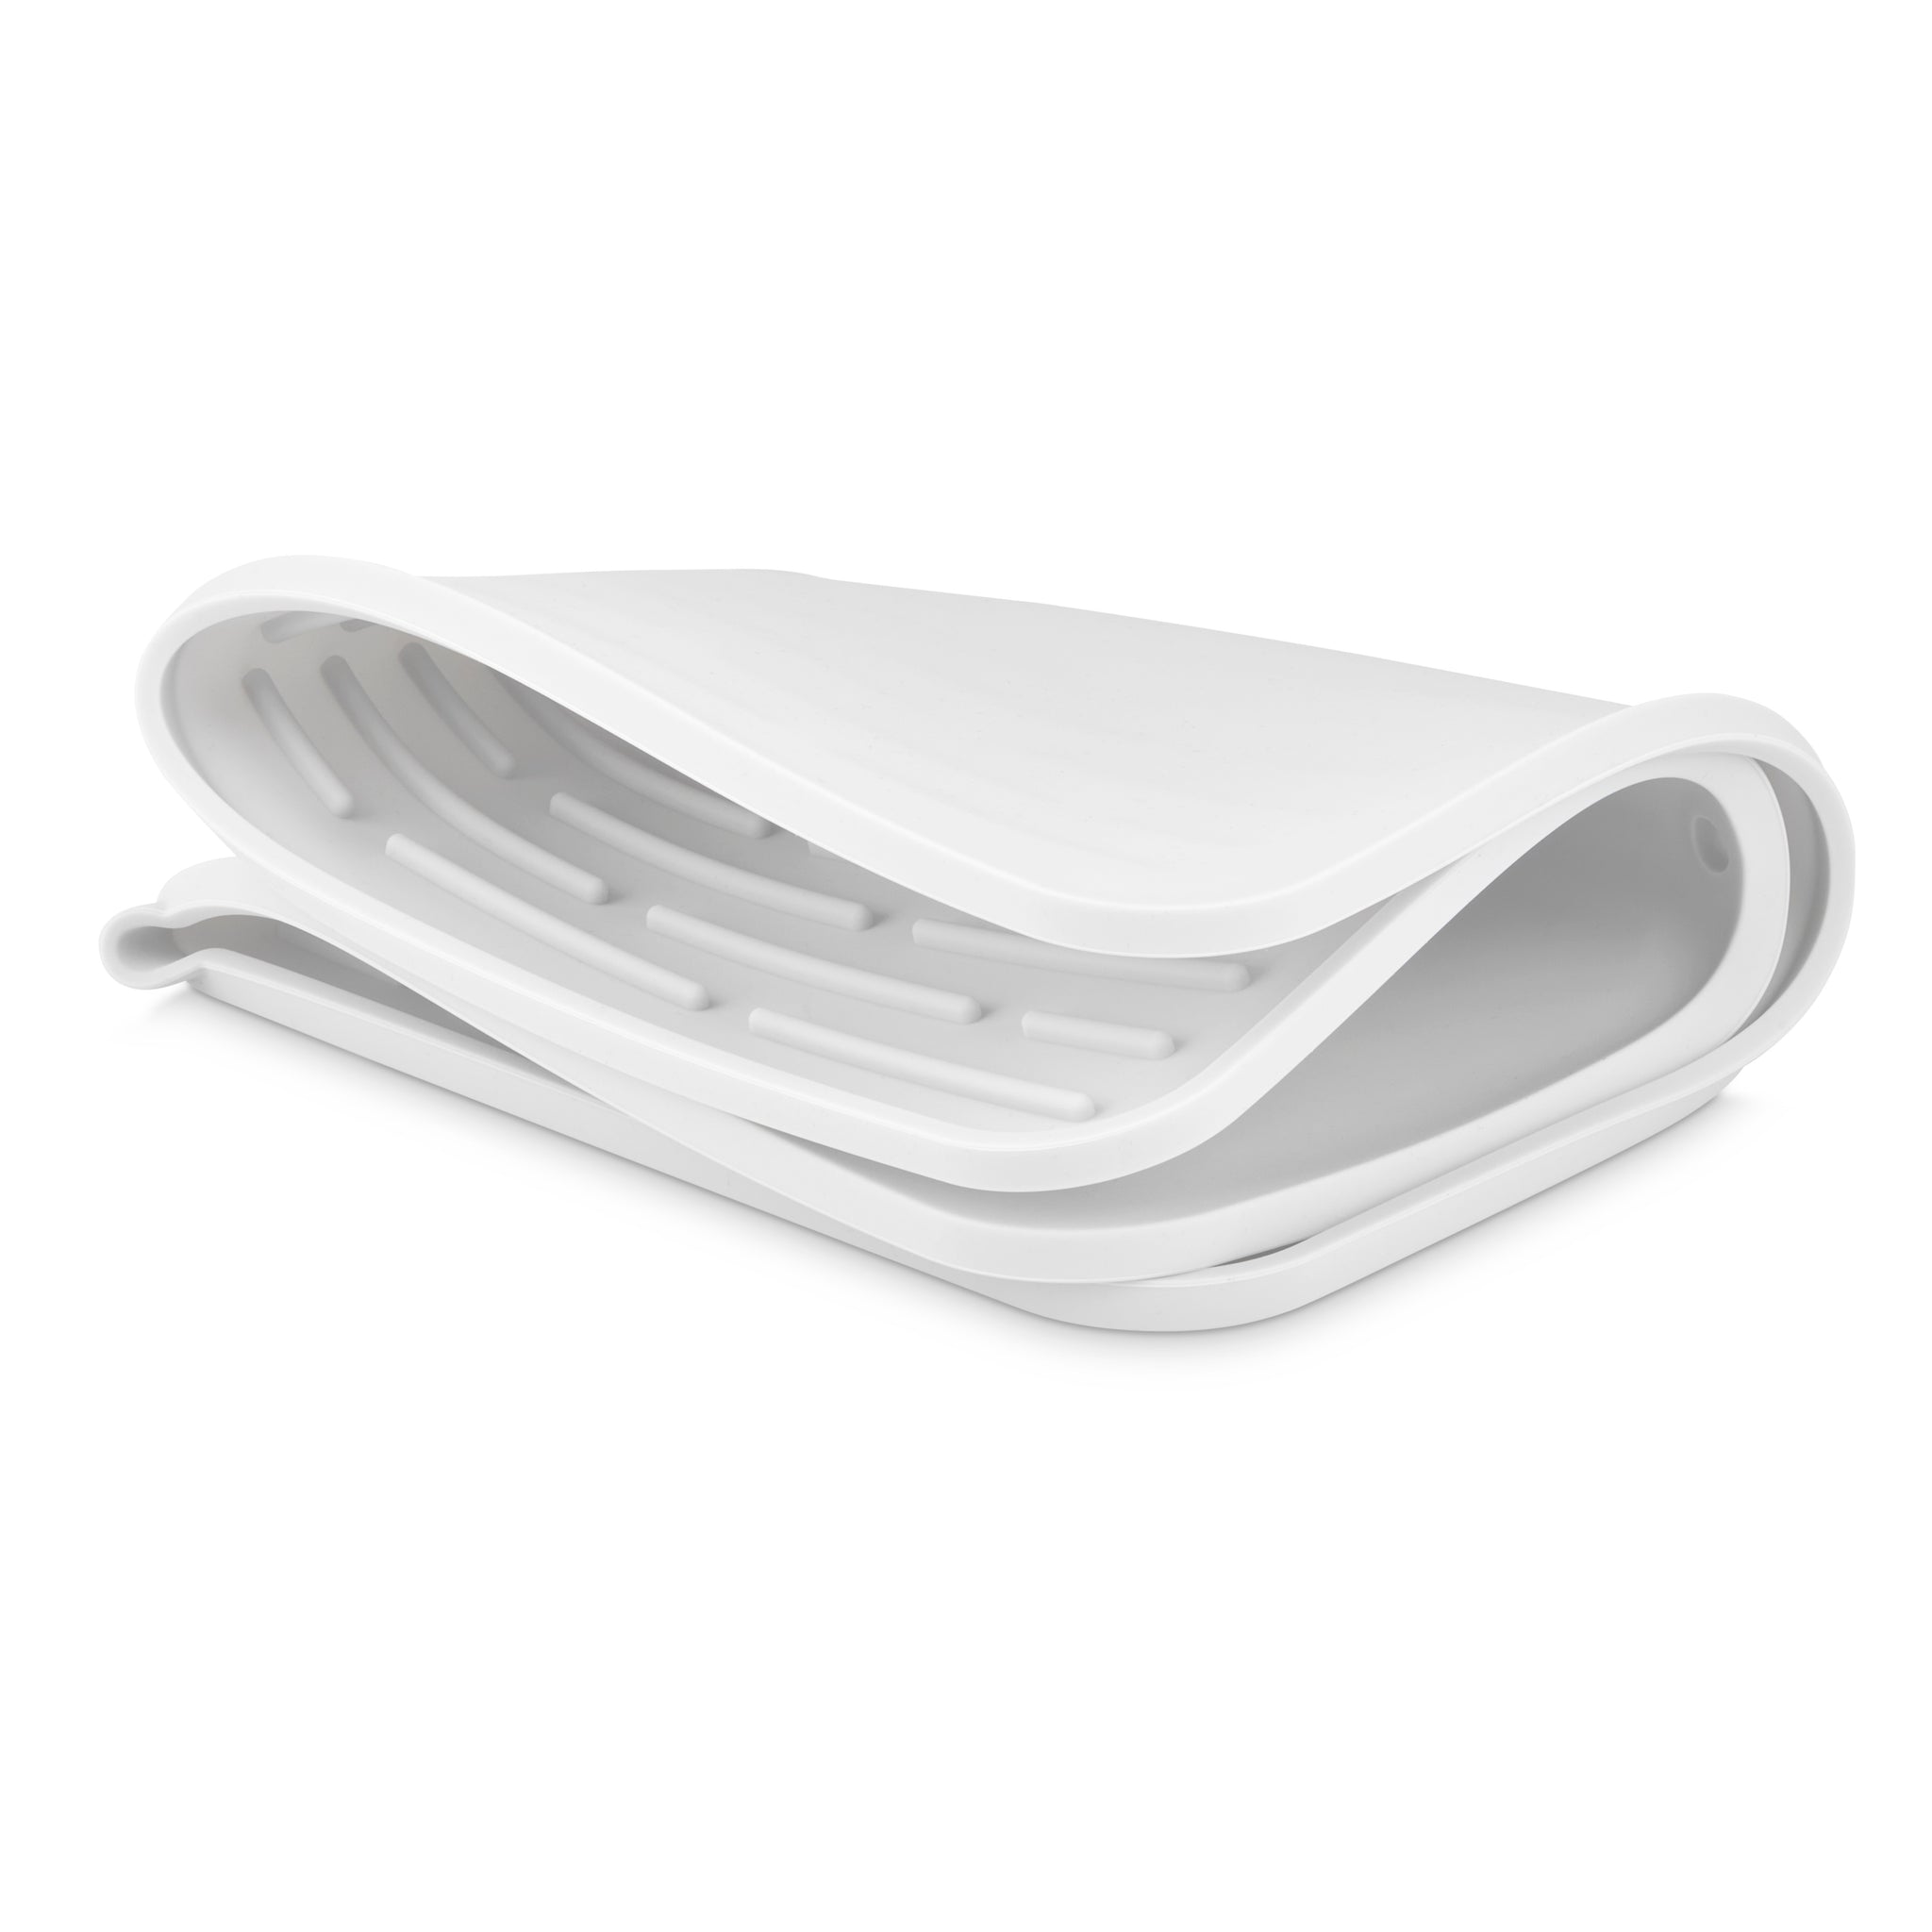 DESIGNSTUFF - Folding Silicone Drying Mat Large with Drainage Mouth - White